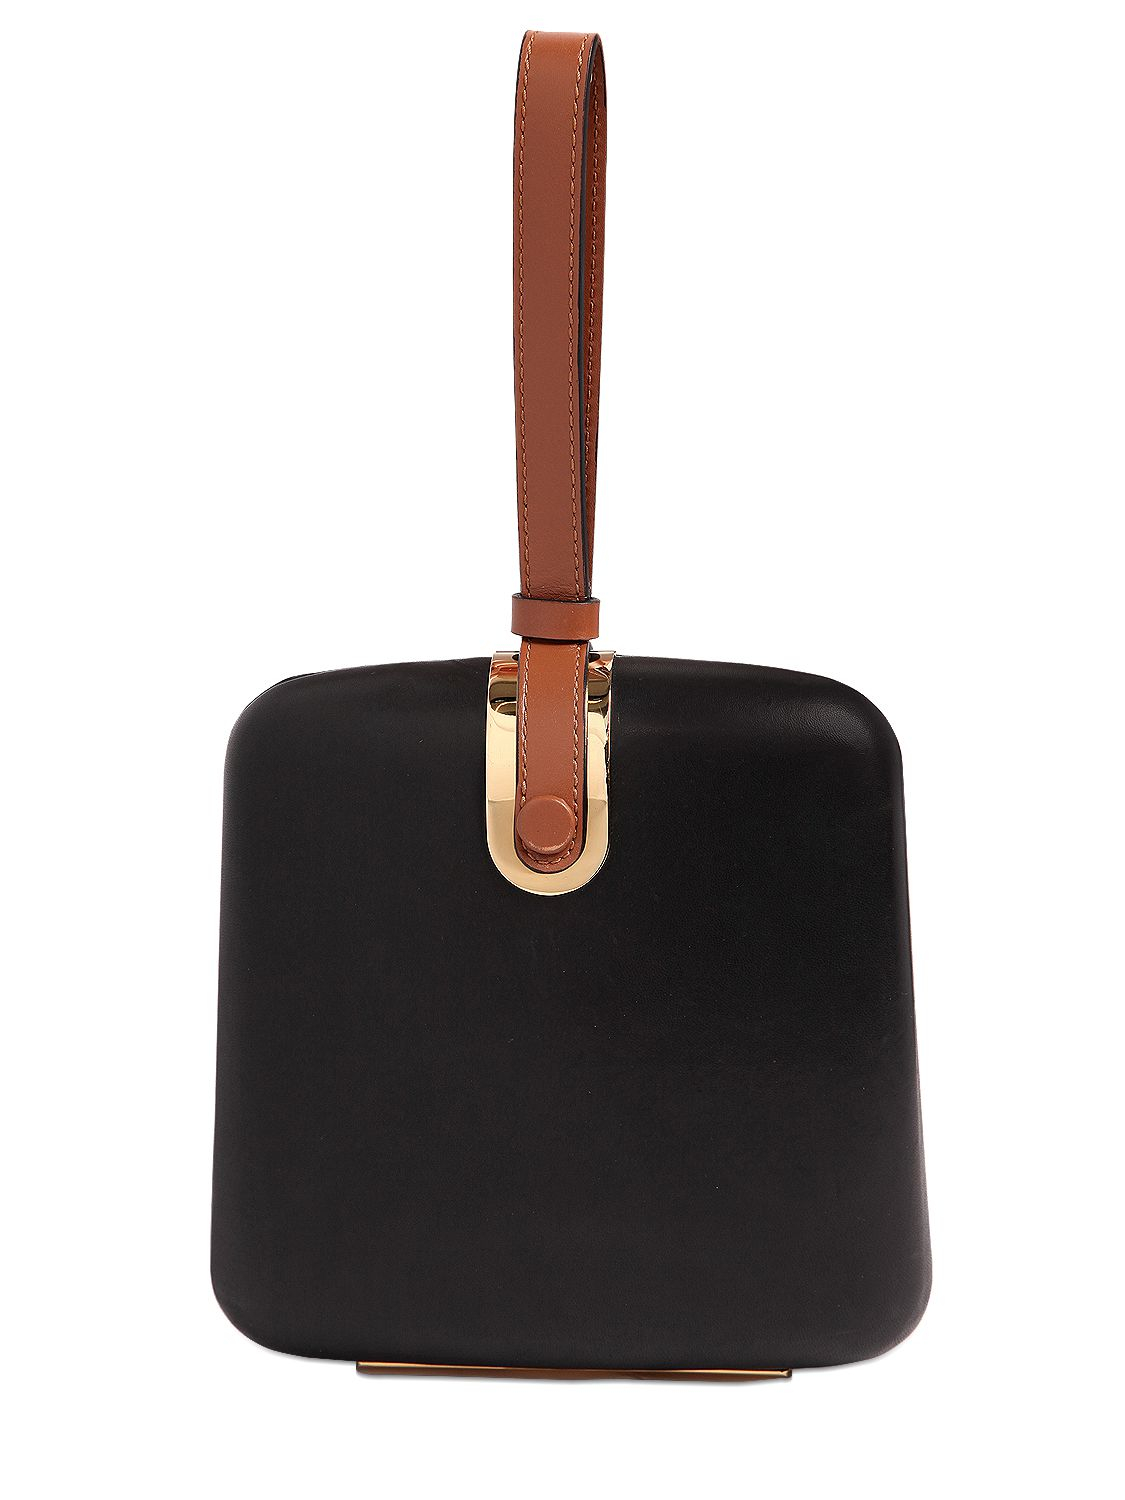 Lyst - Marni Leather Clutch With Wrist Strap in Black